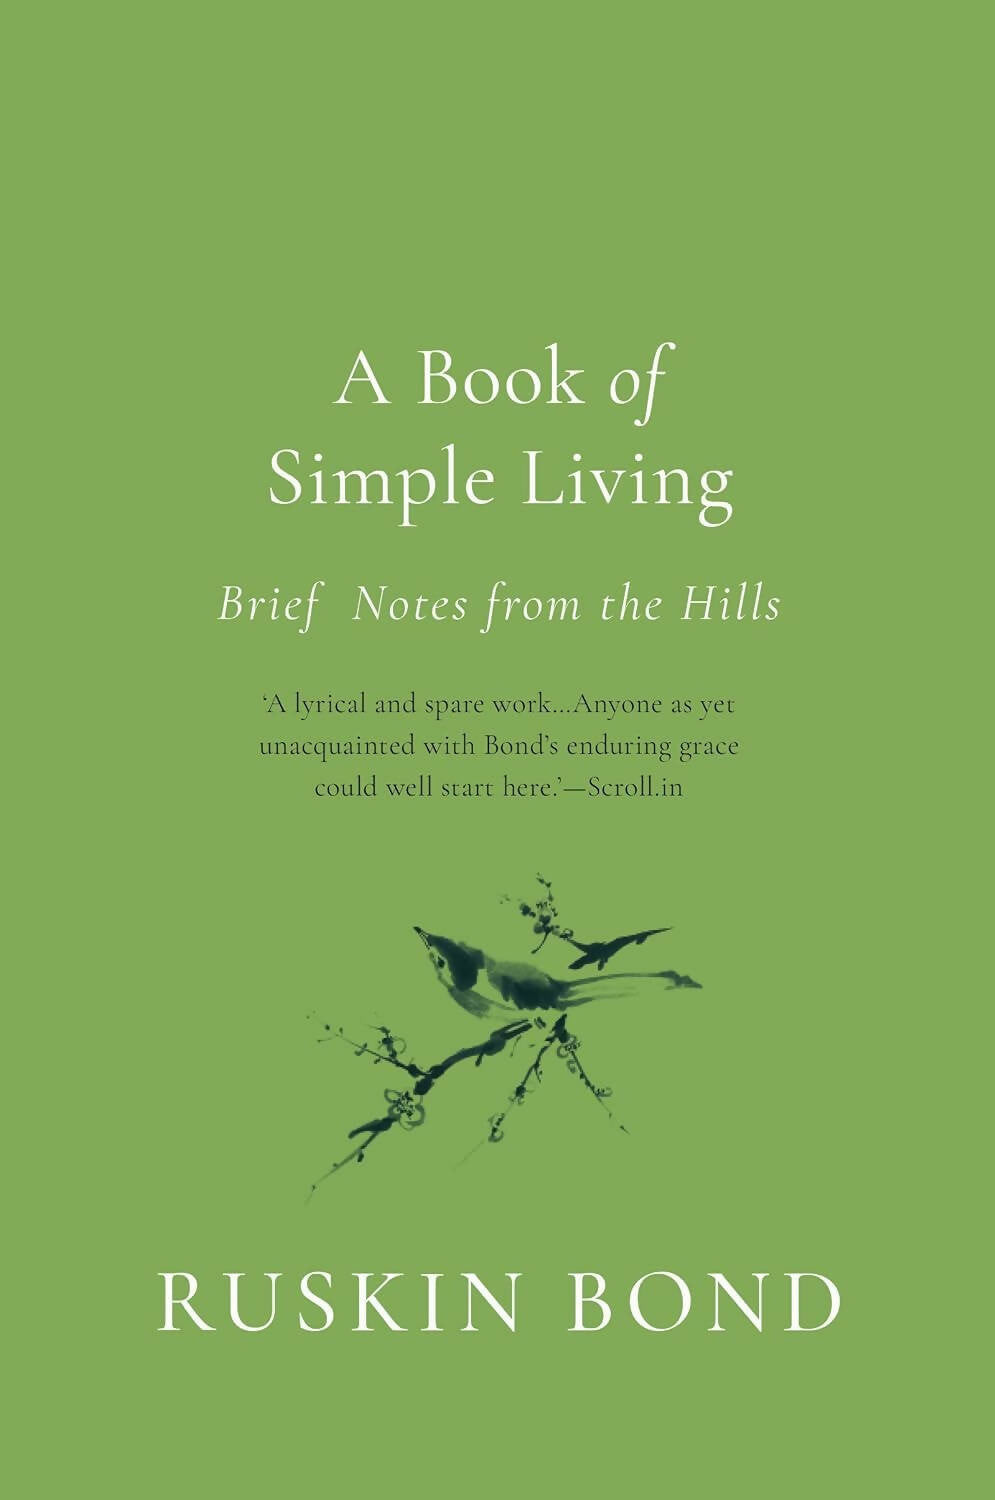 A Book of Simple Living by Ruskin Bond